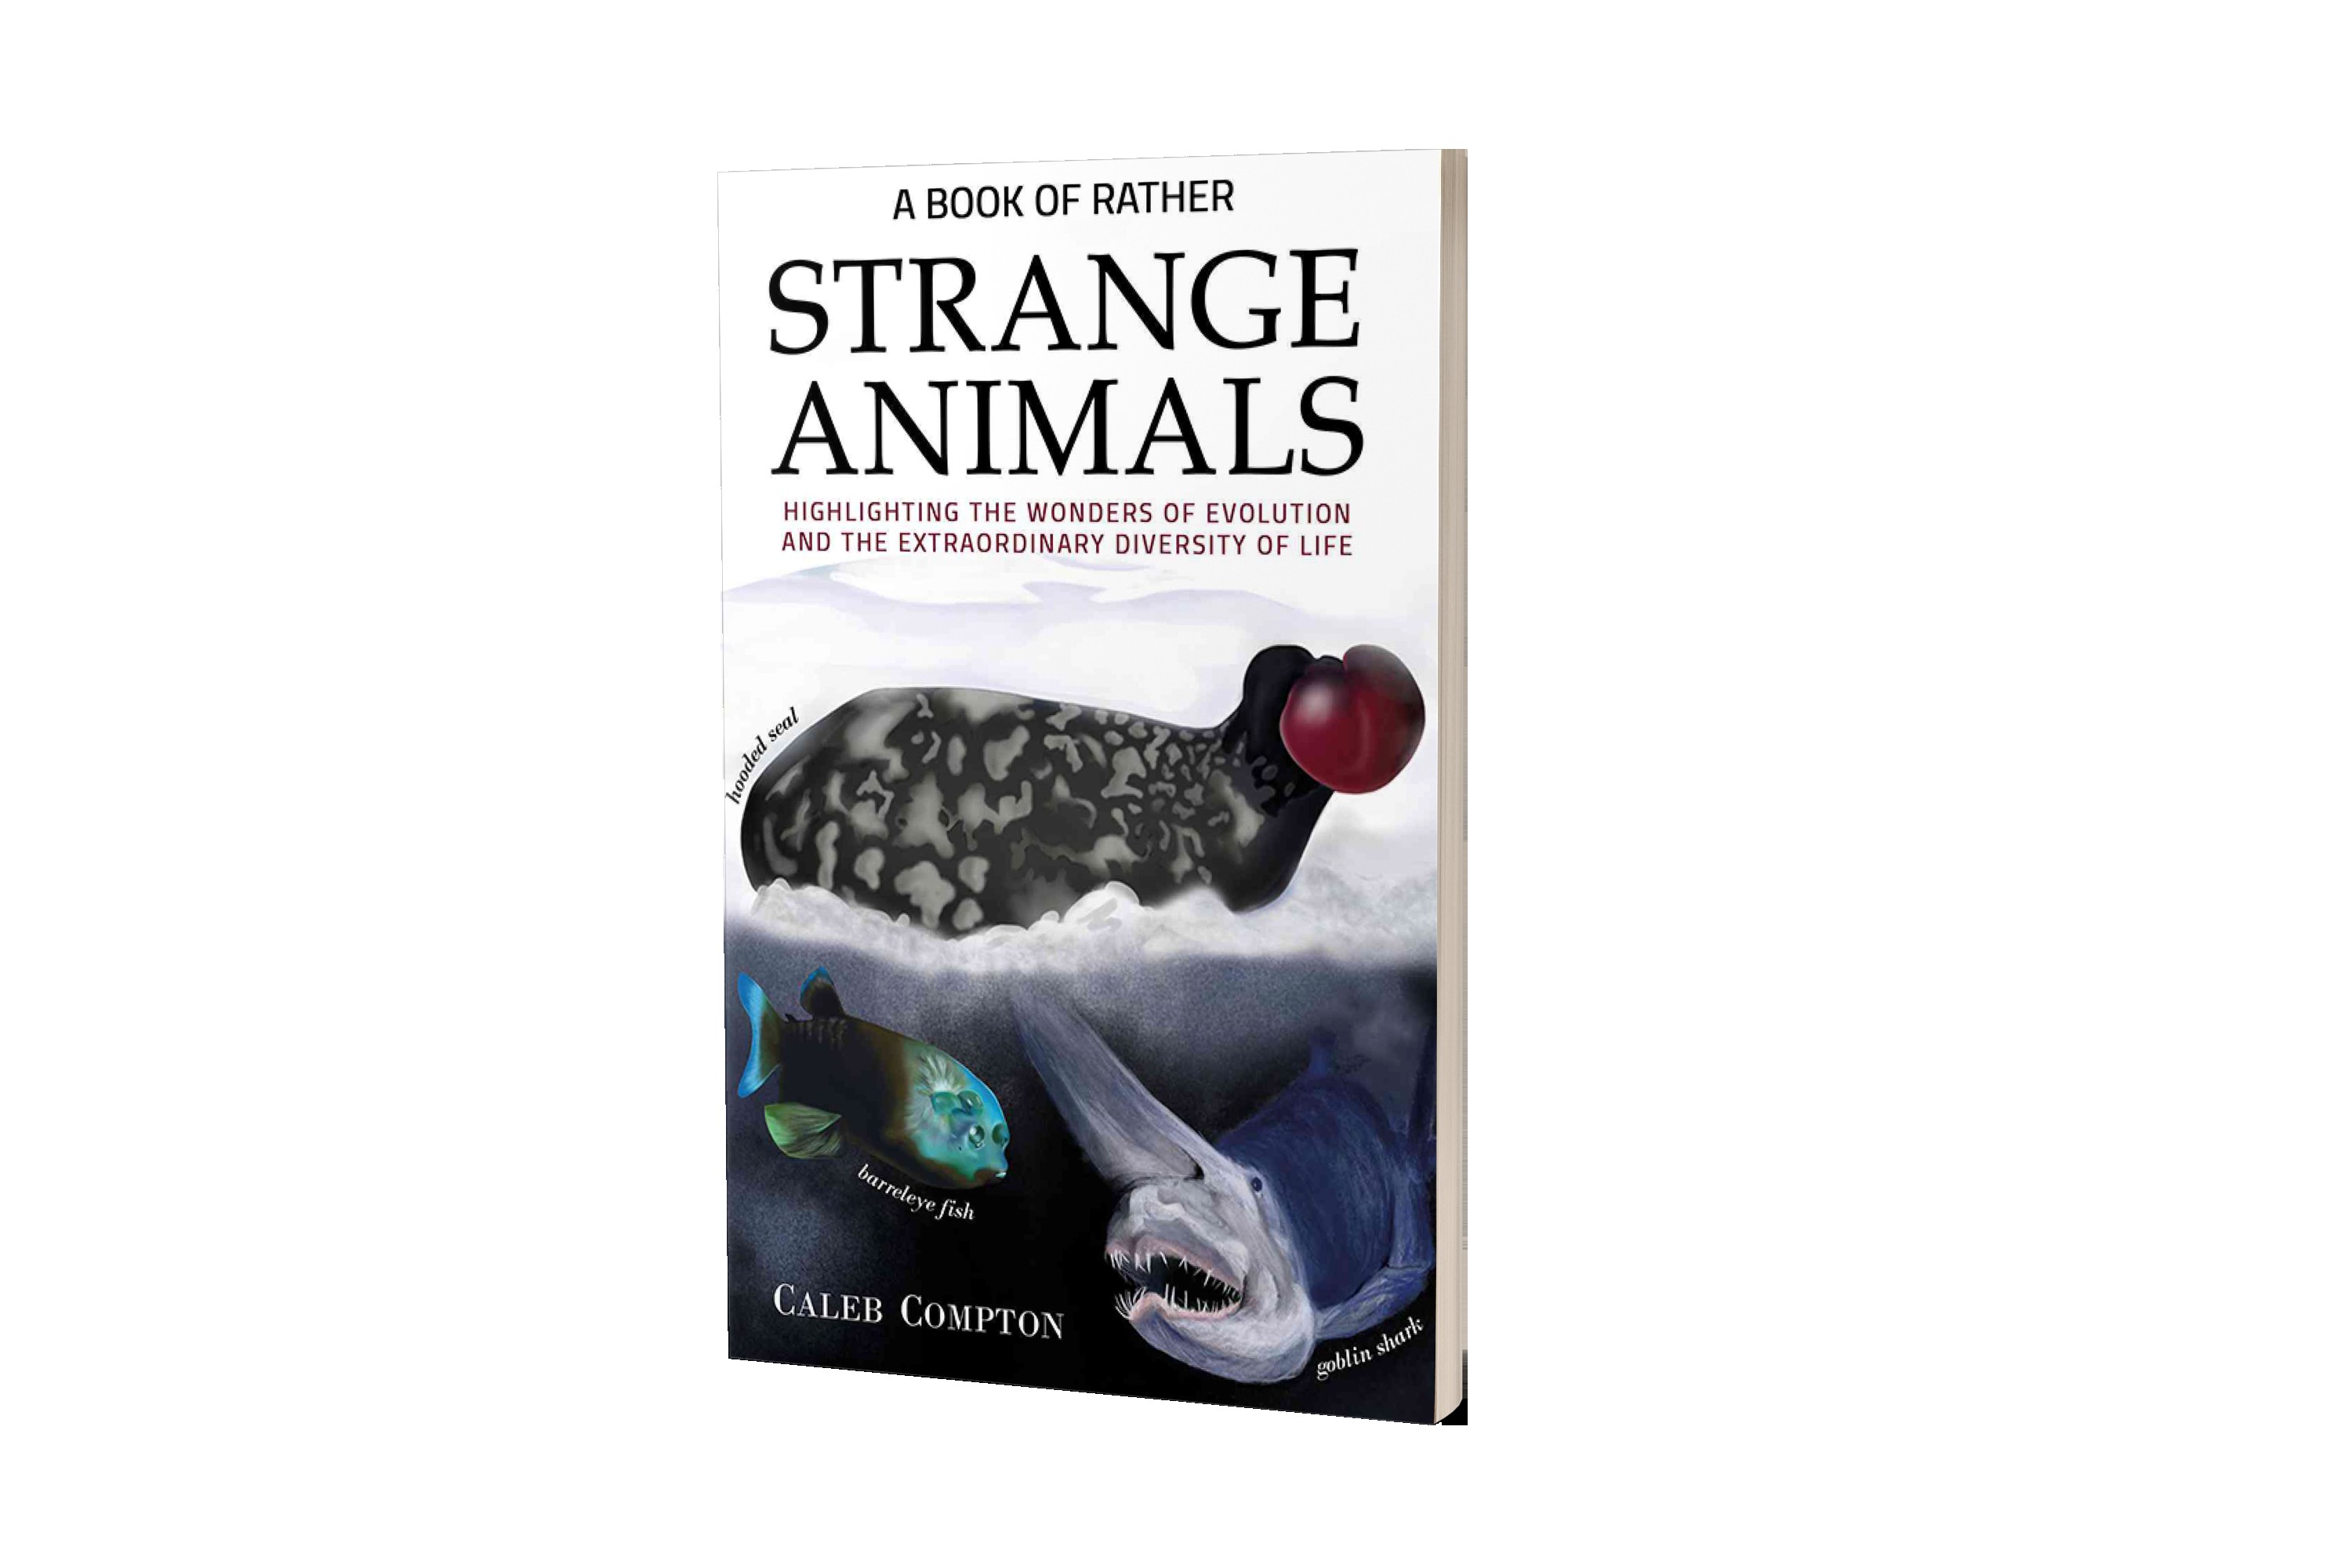  Caleb Compton’s Book Gets Amazing Reviews by NHBS and the Inquisitive Biologist’s Websites